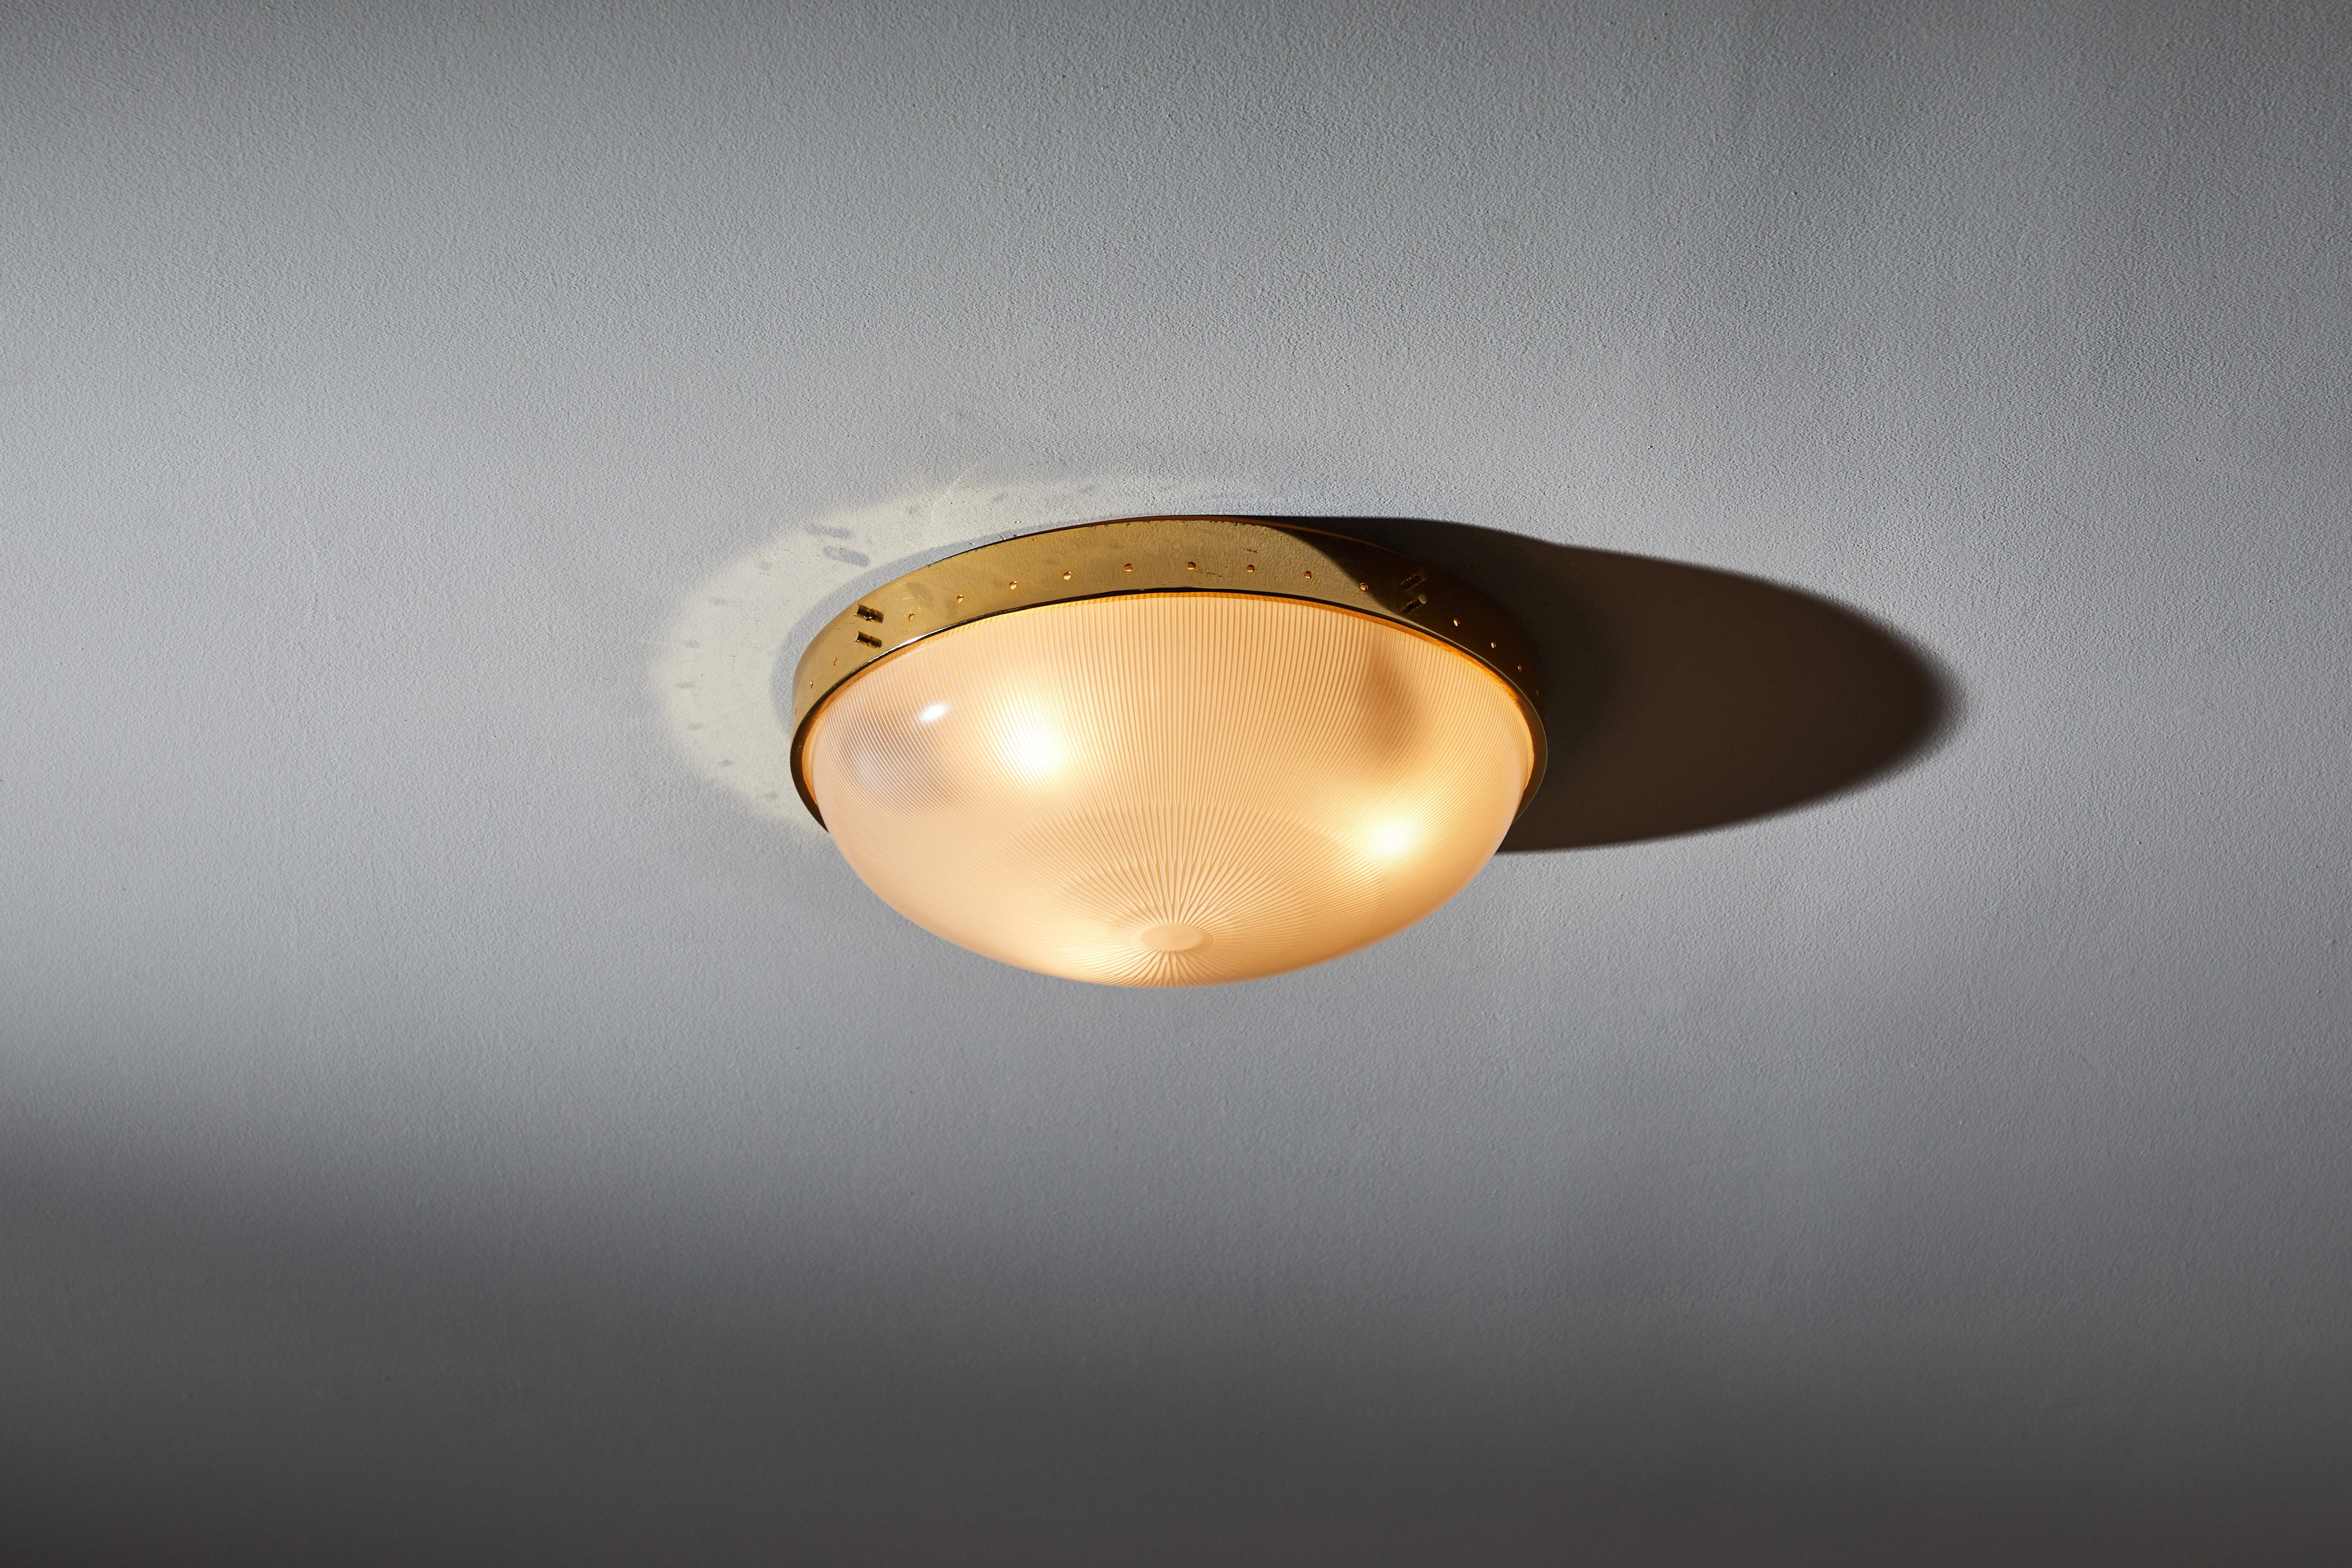 Four flush mount ceiling lights. Manufactured in Italy, circa 1960s. Holophane glass, brass. Rewired for U.S. standards. We recommend three E27 40w maximum bulbs. Bulbs provided as a one time courtesy. Priced and sold individually.